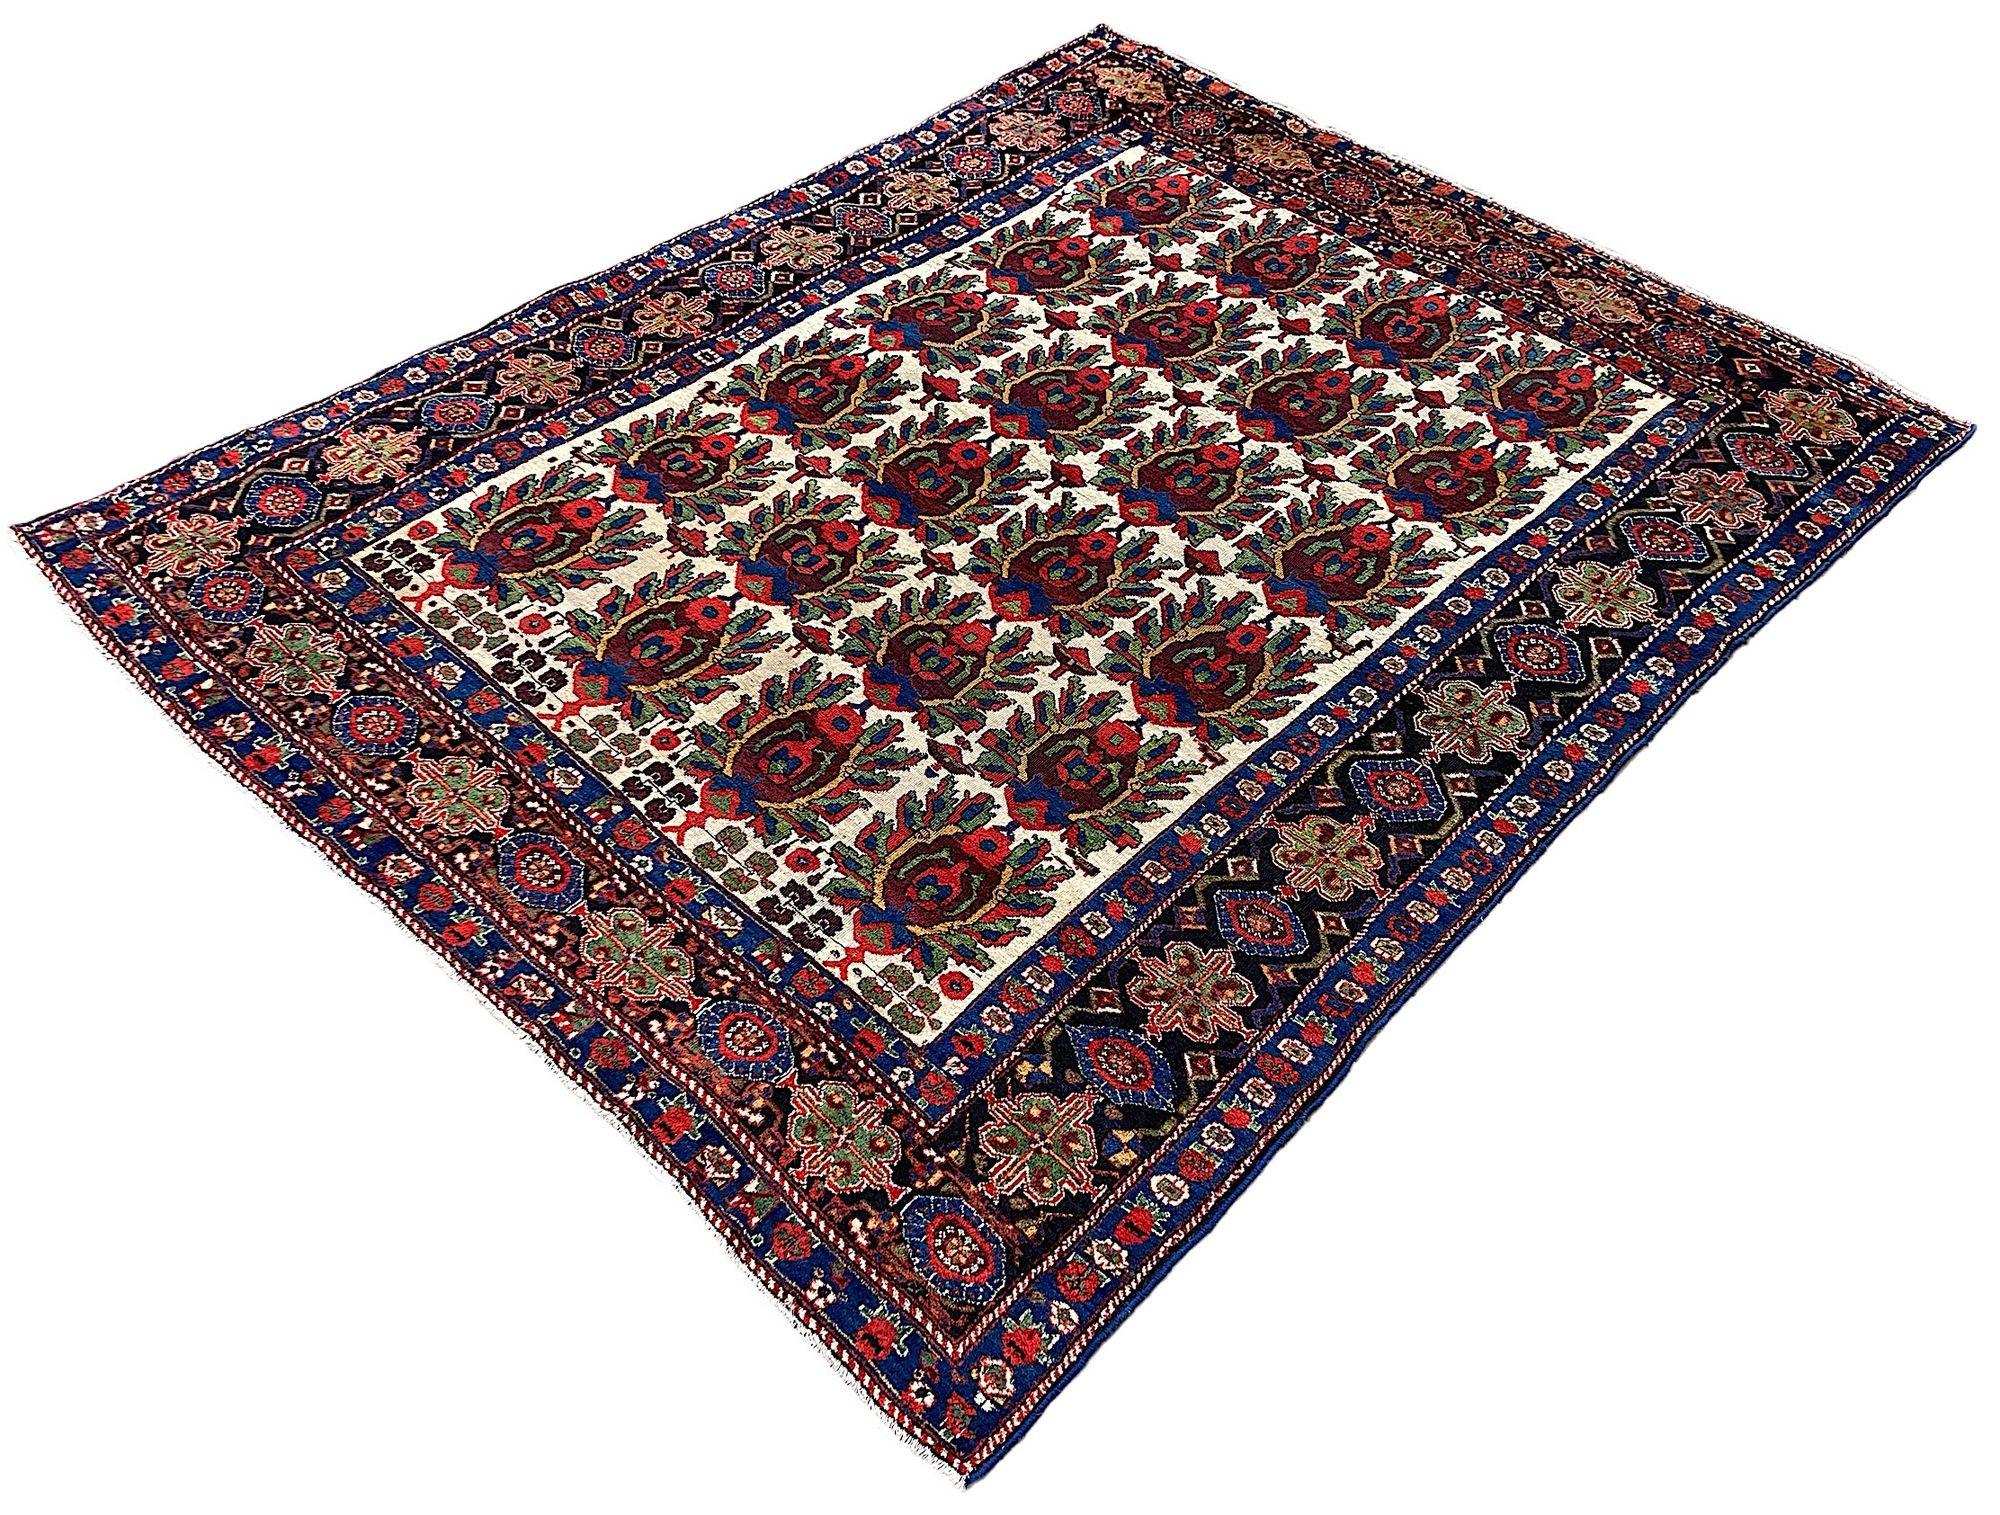 Antique Afshar Rug 1.85m x 1.48m In Good Condition For Sale In St. Albans, GB